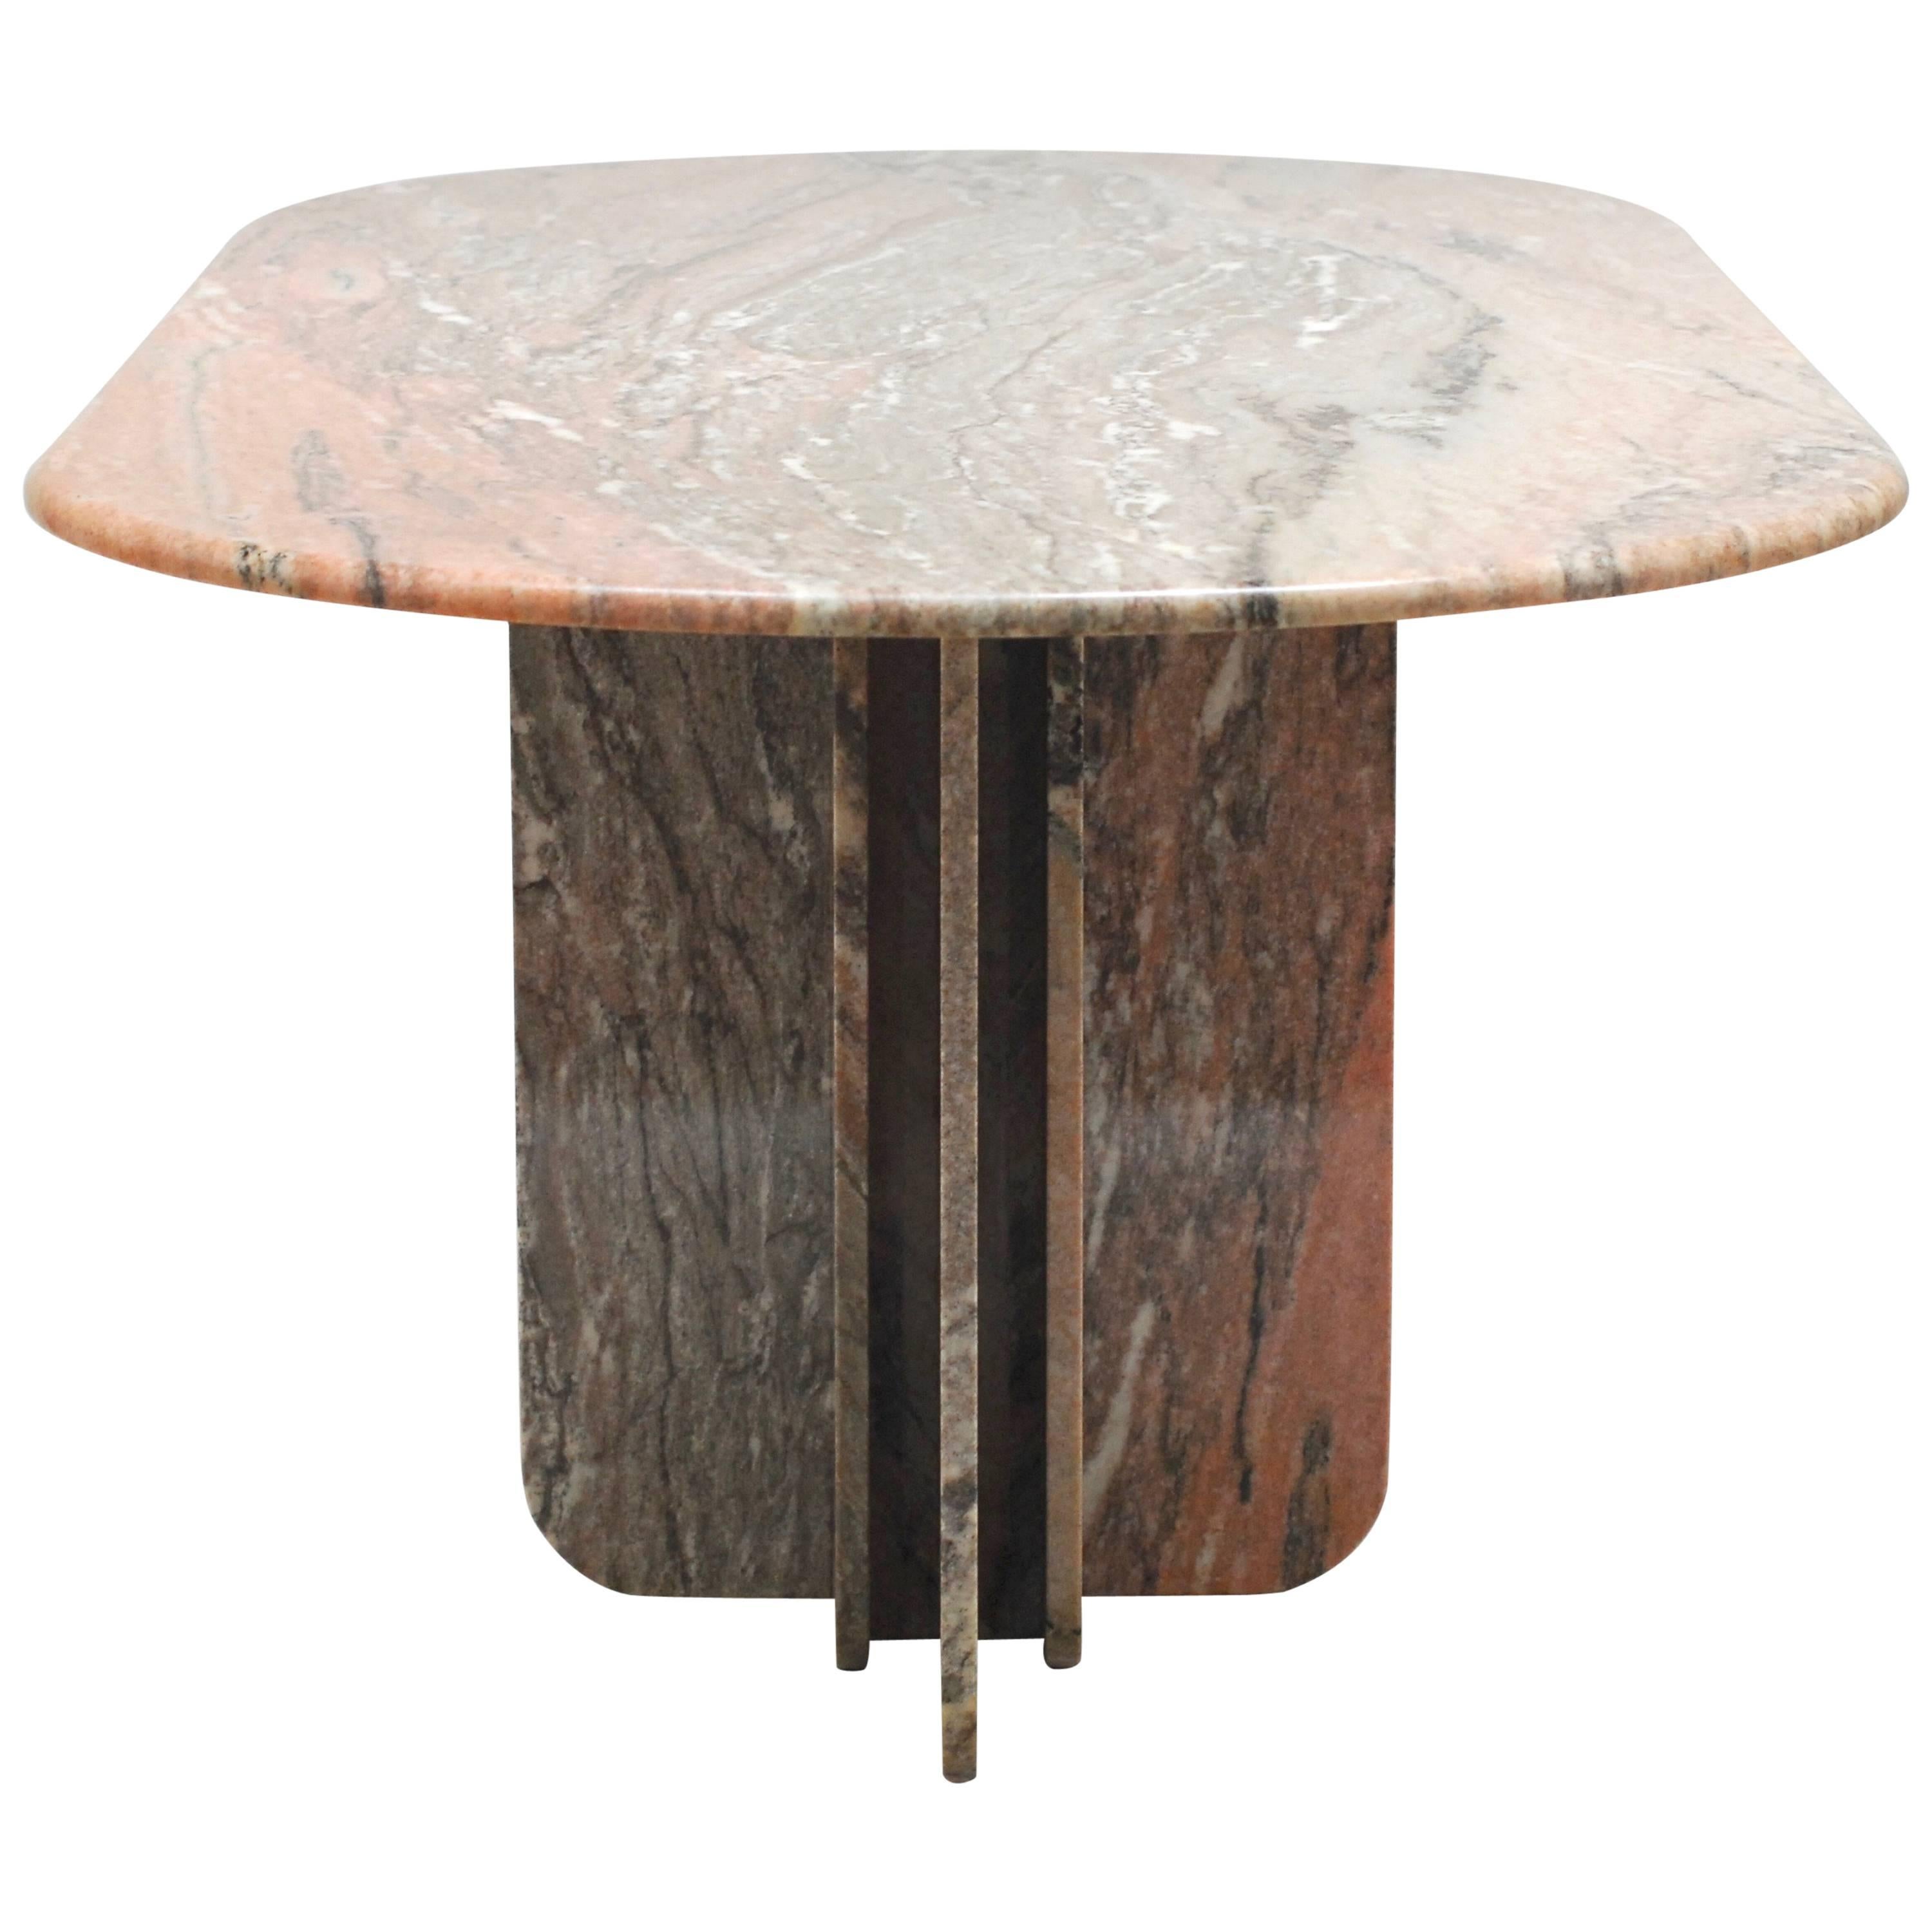 1979 Brazilian Marble Dining table by Georges Matthias